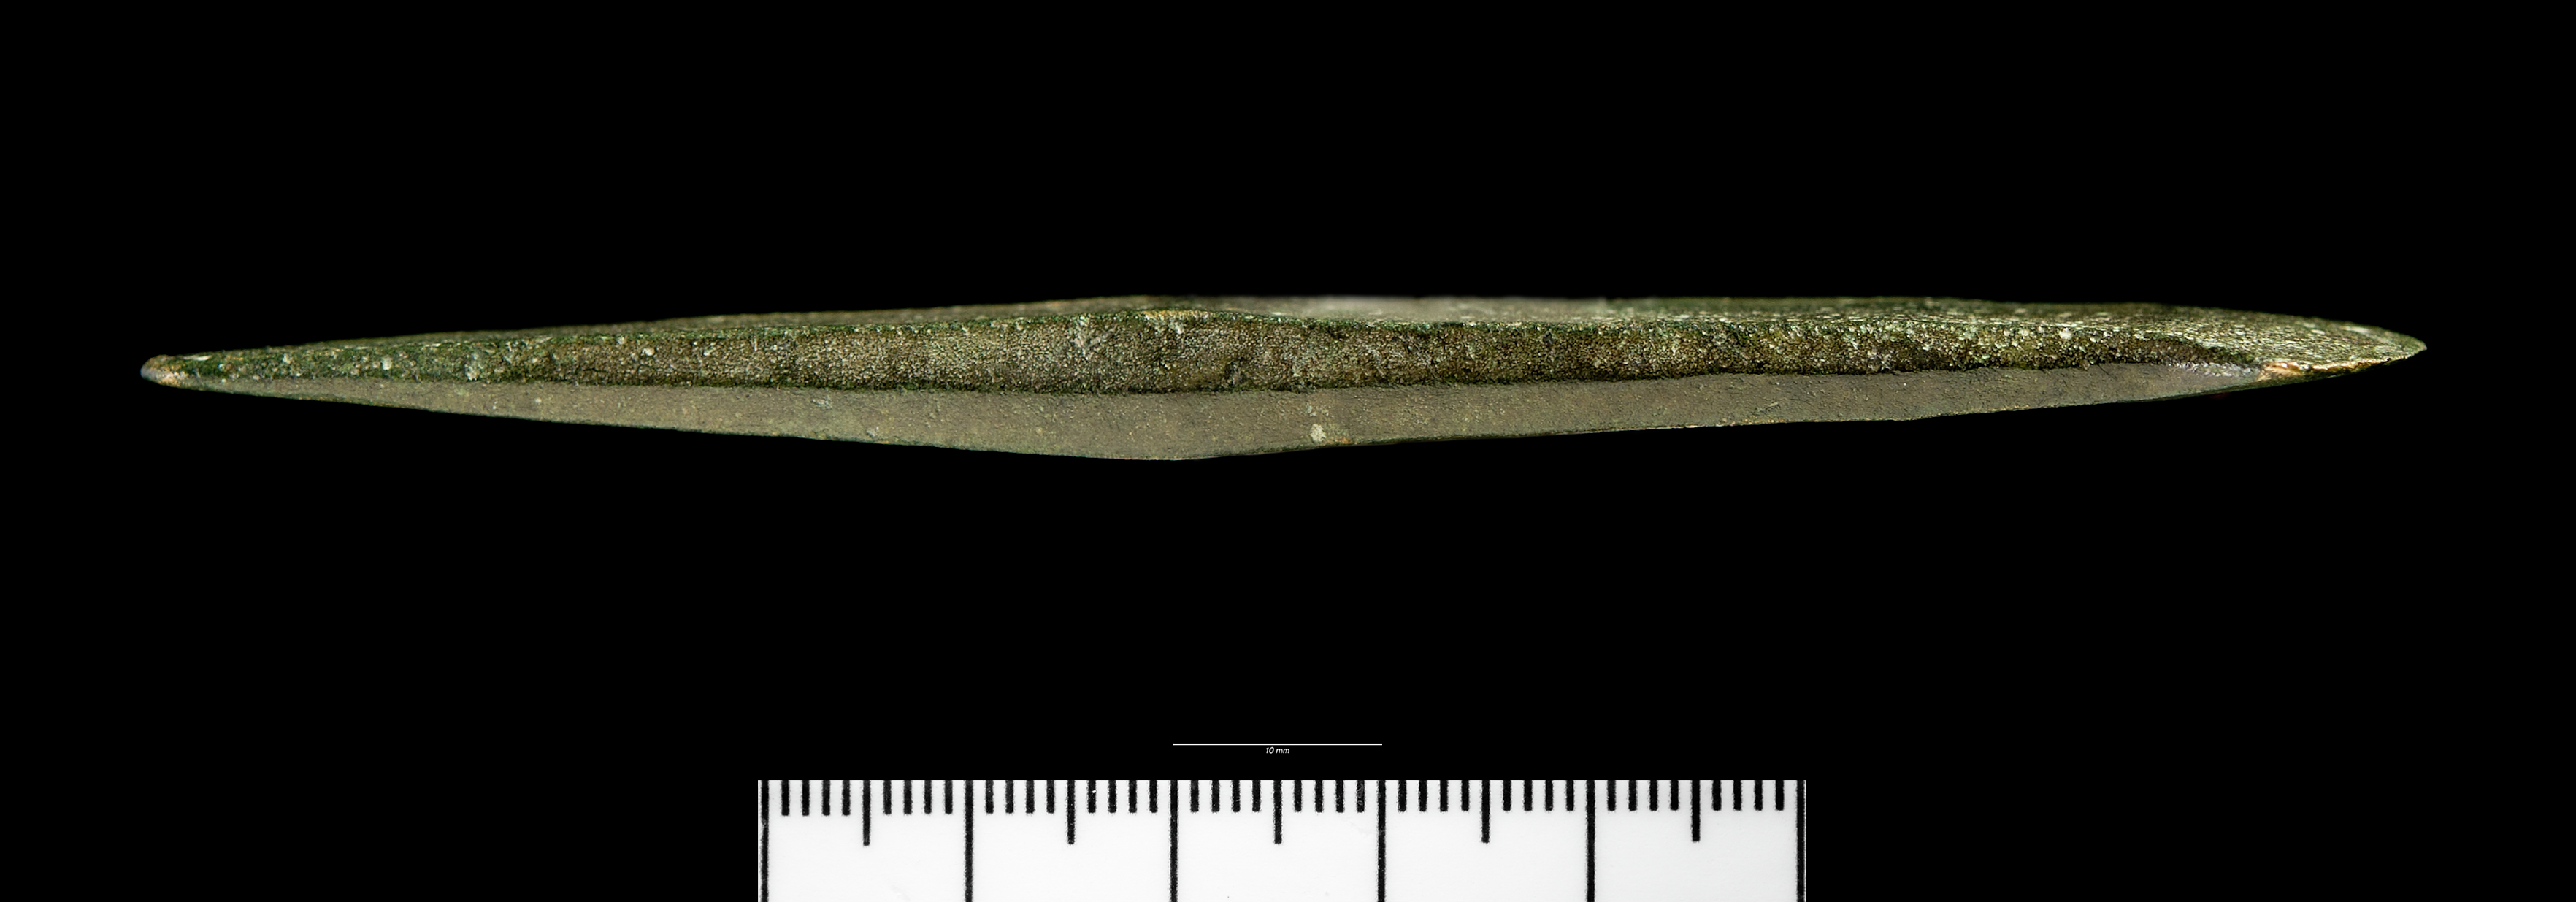 Early Bronze Age bronze flat axe or chisel